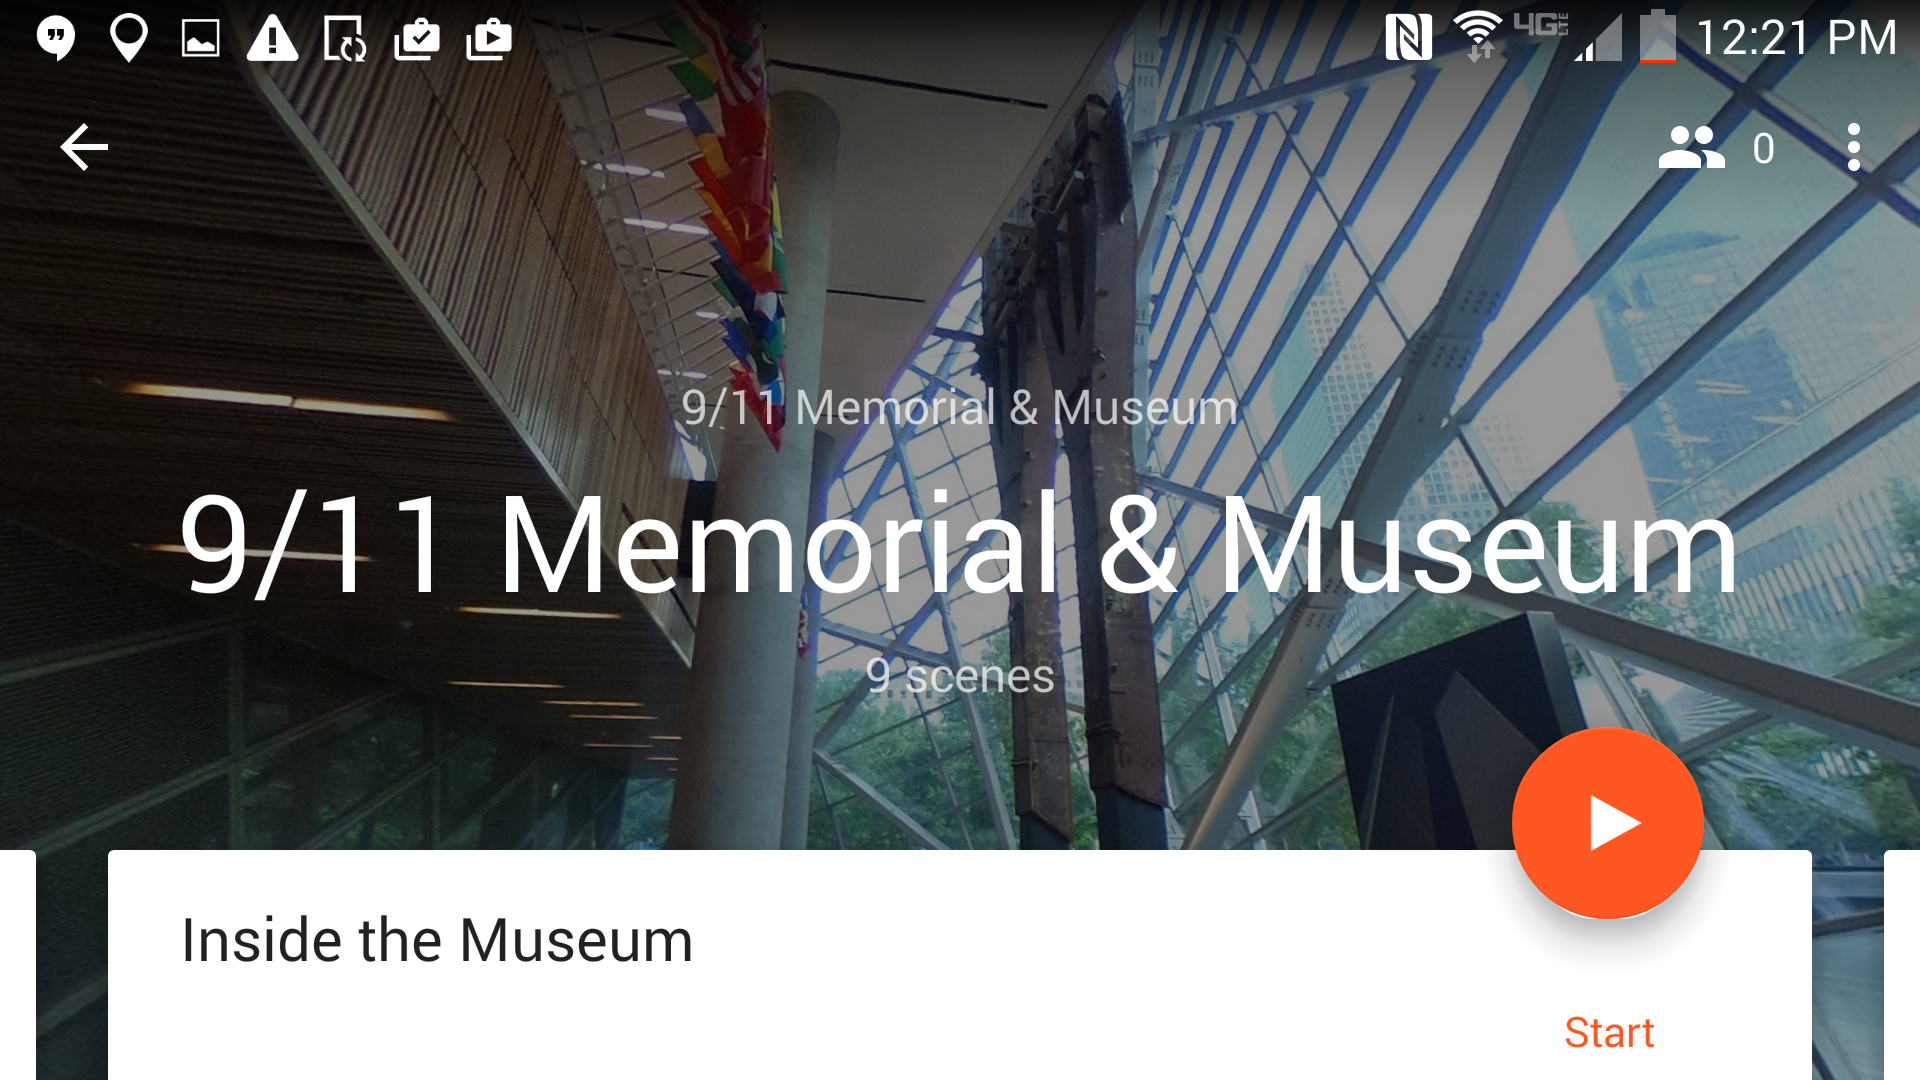 A screenshot of the Google Expeditions app features the 9/11 Memorial & Museum.